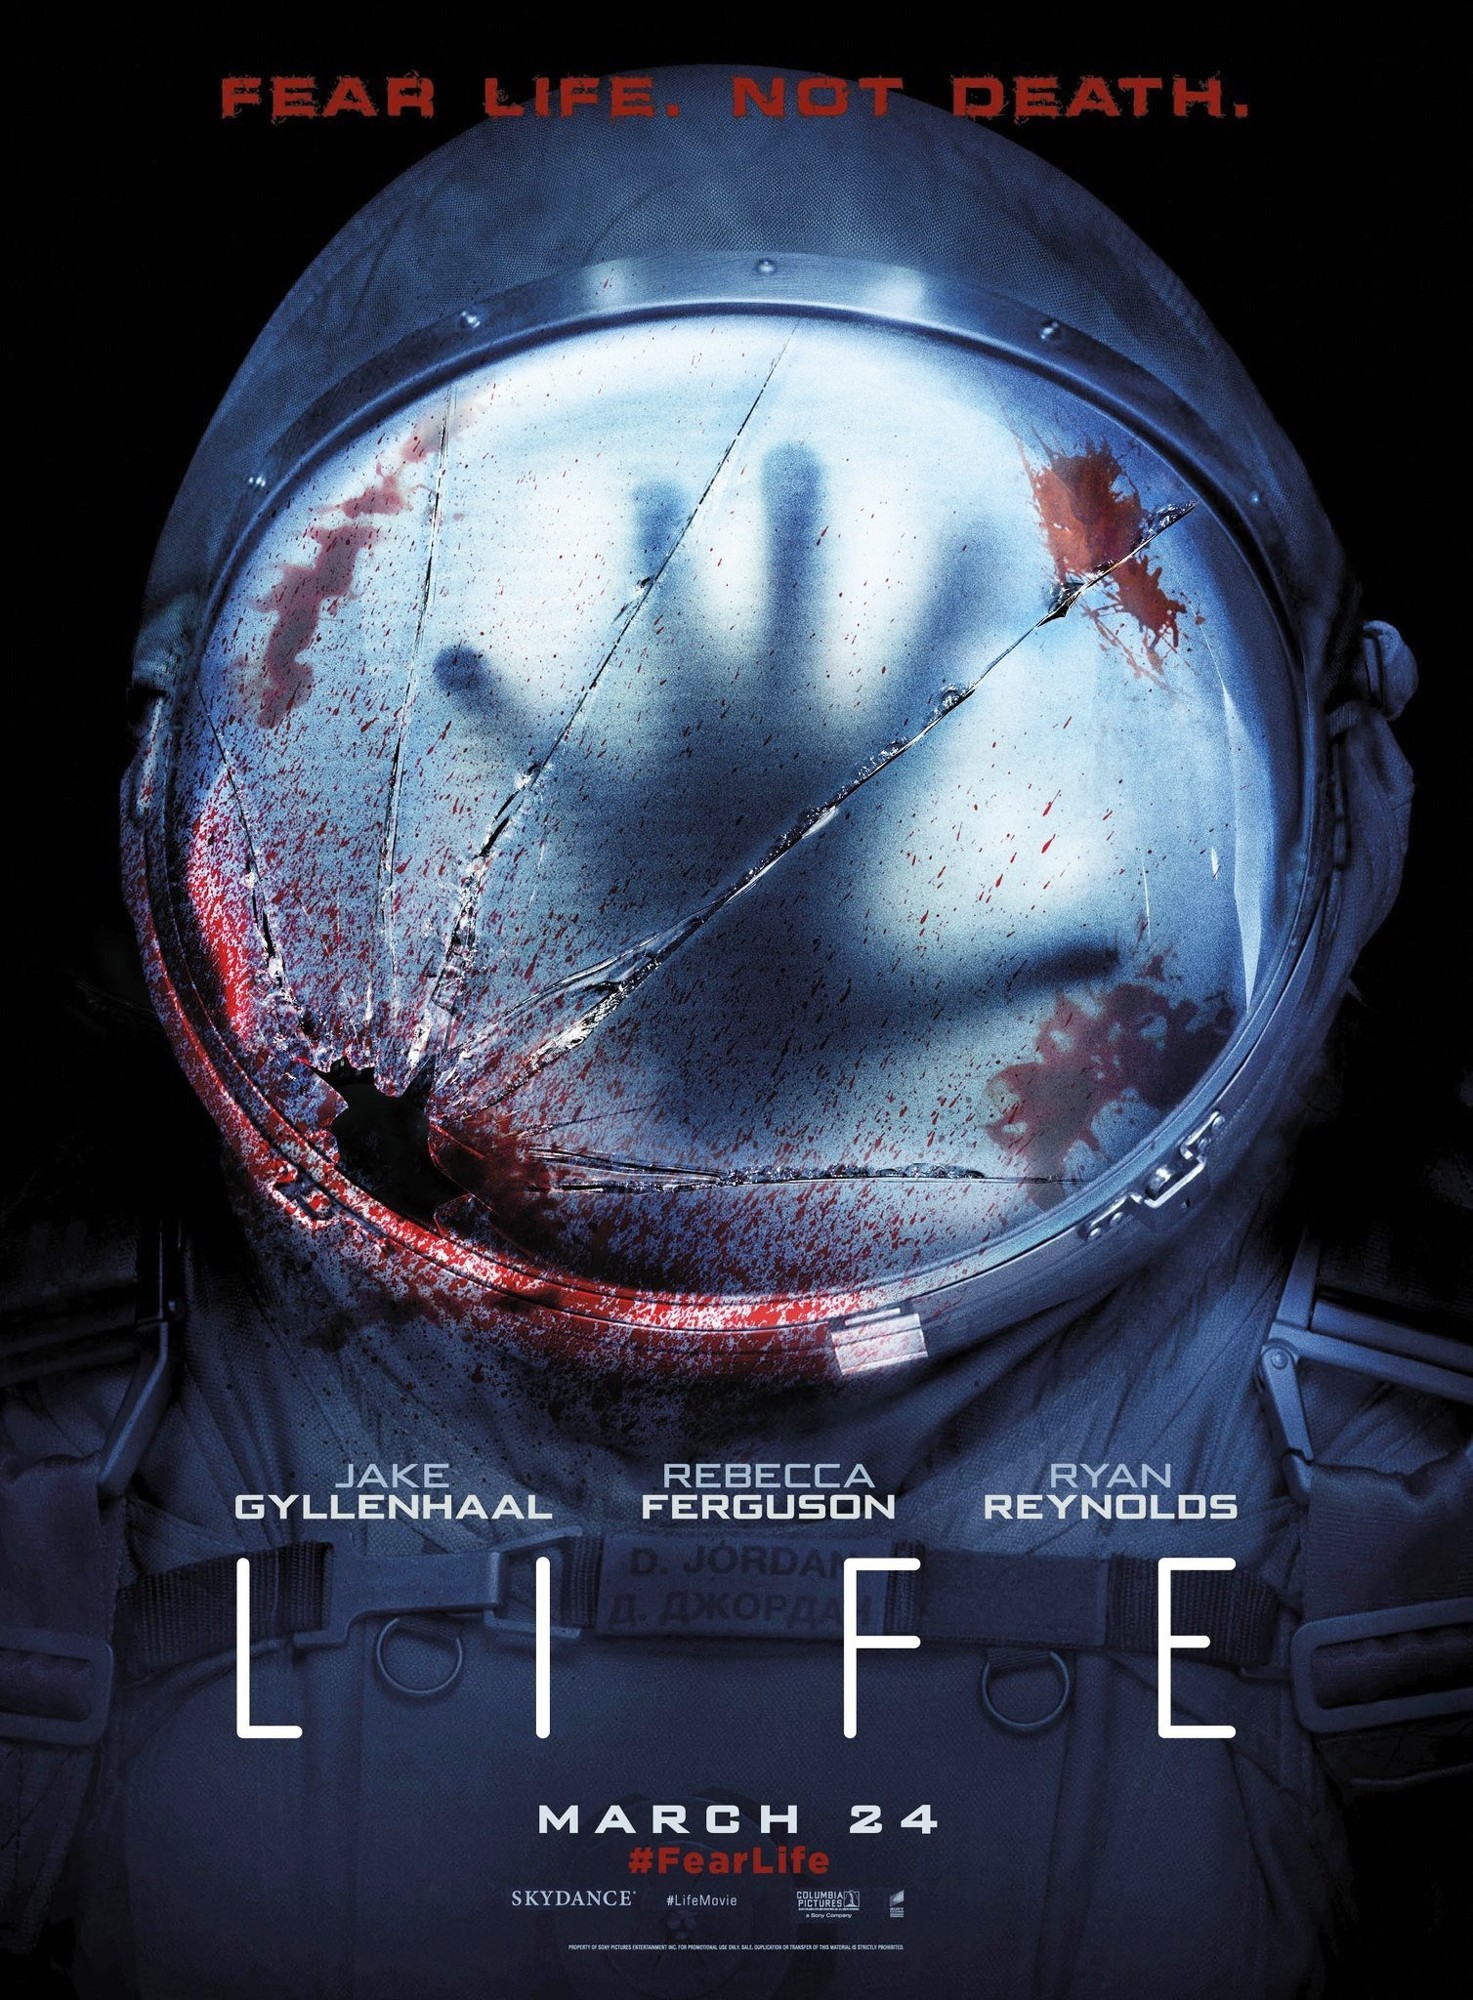 Poster of Sony Pictures' Life (2017)